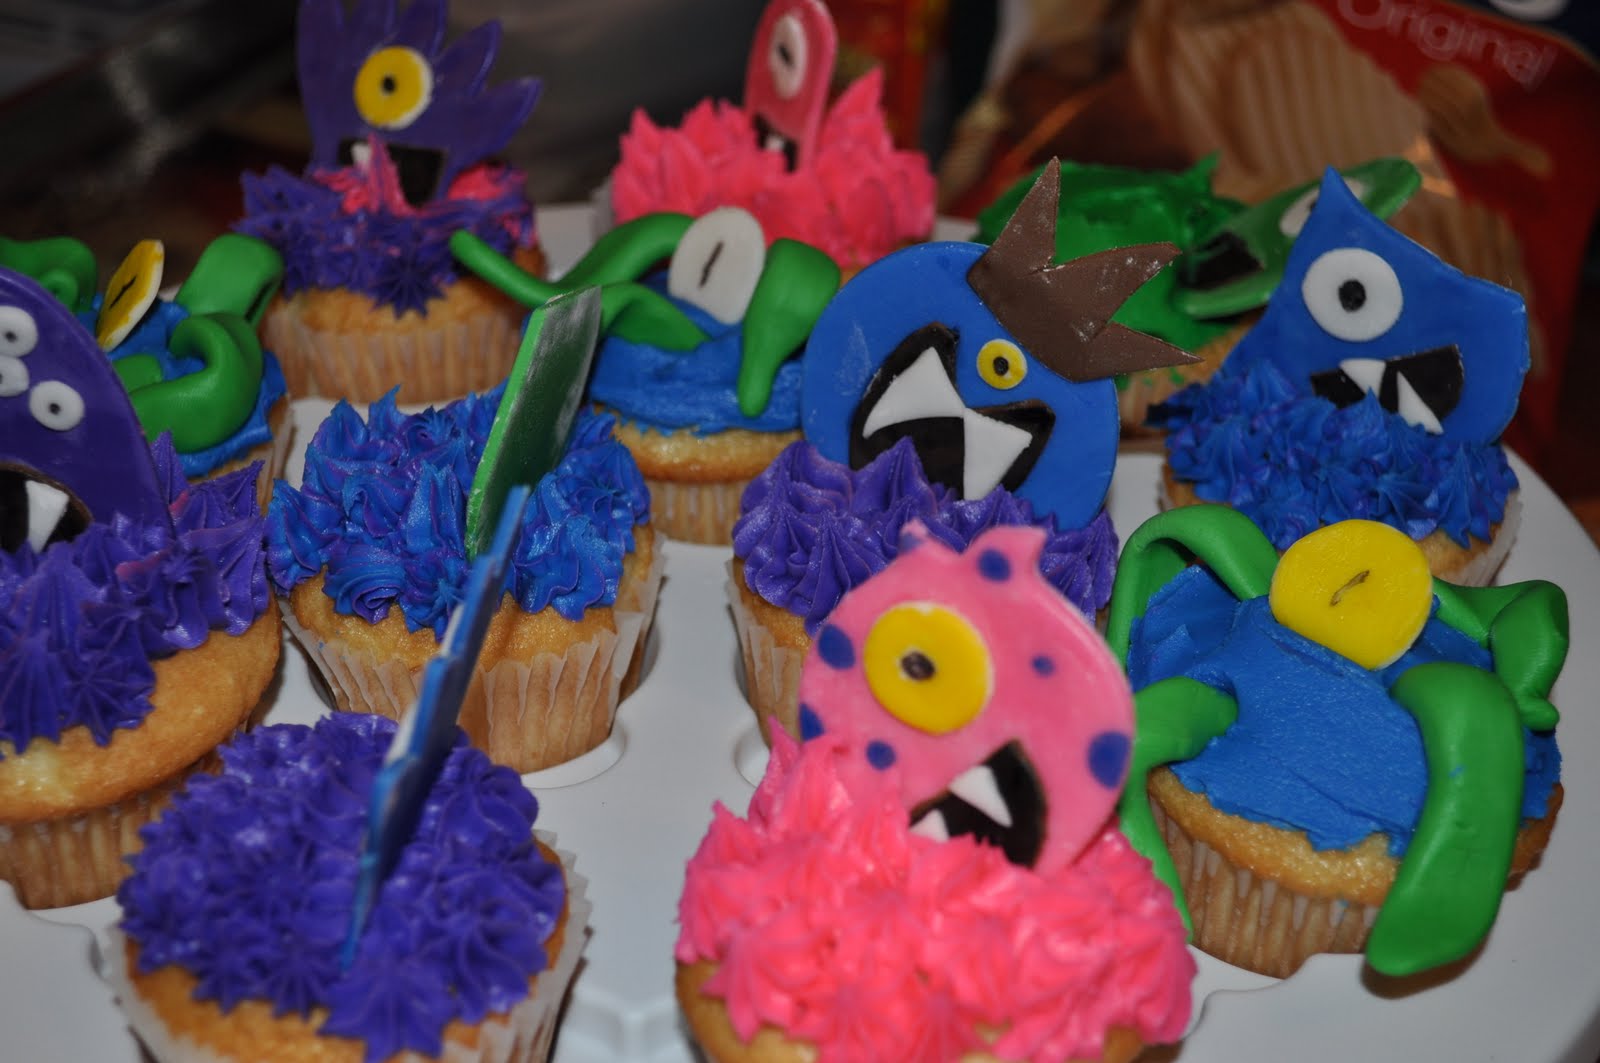 halloween graveyard cakes Posted by Deamers at 1:01 PM No comments: